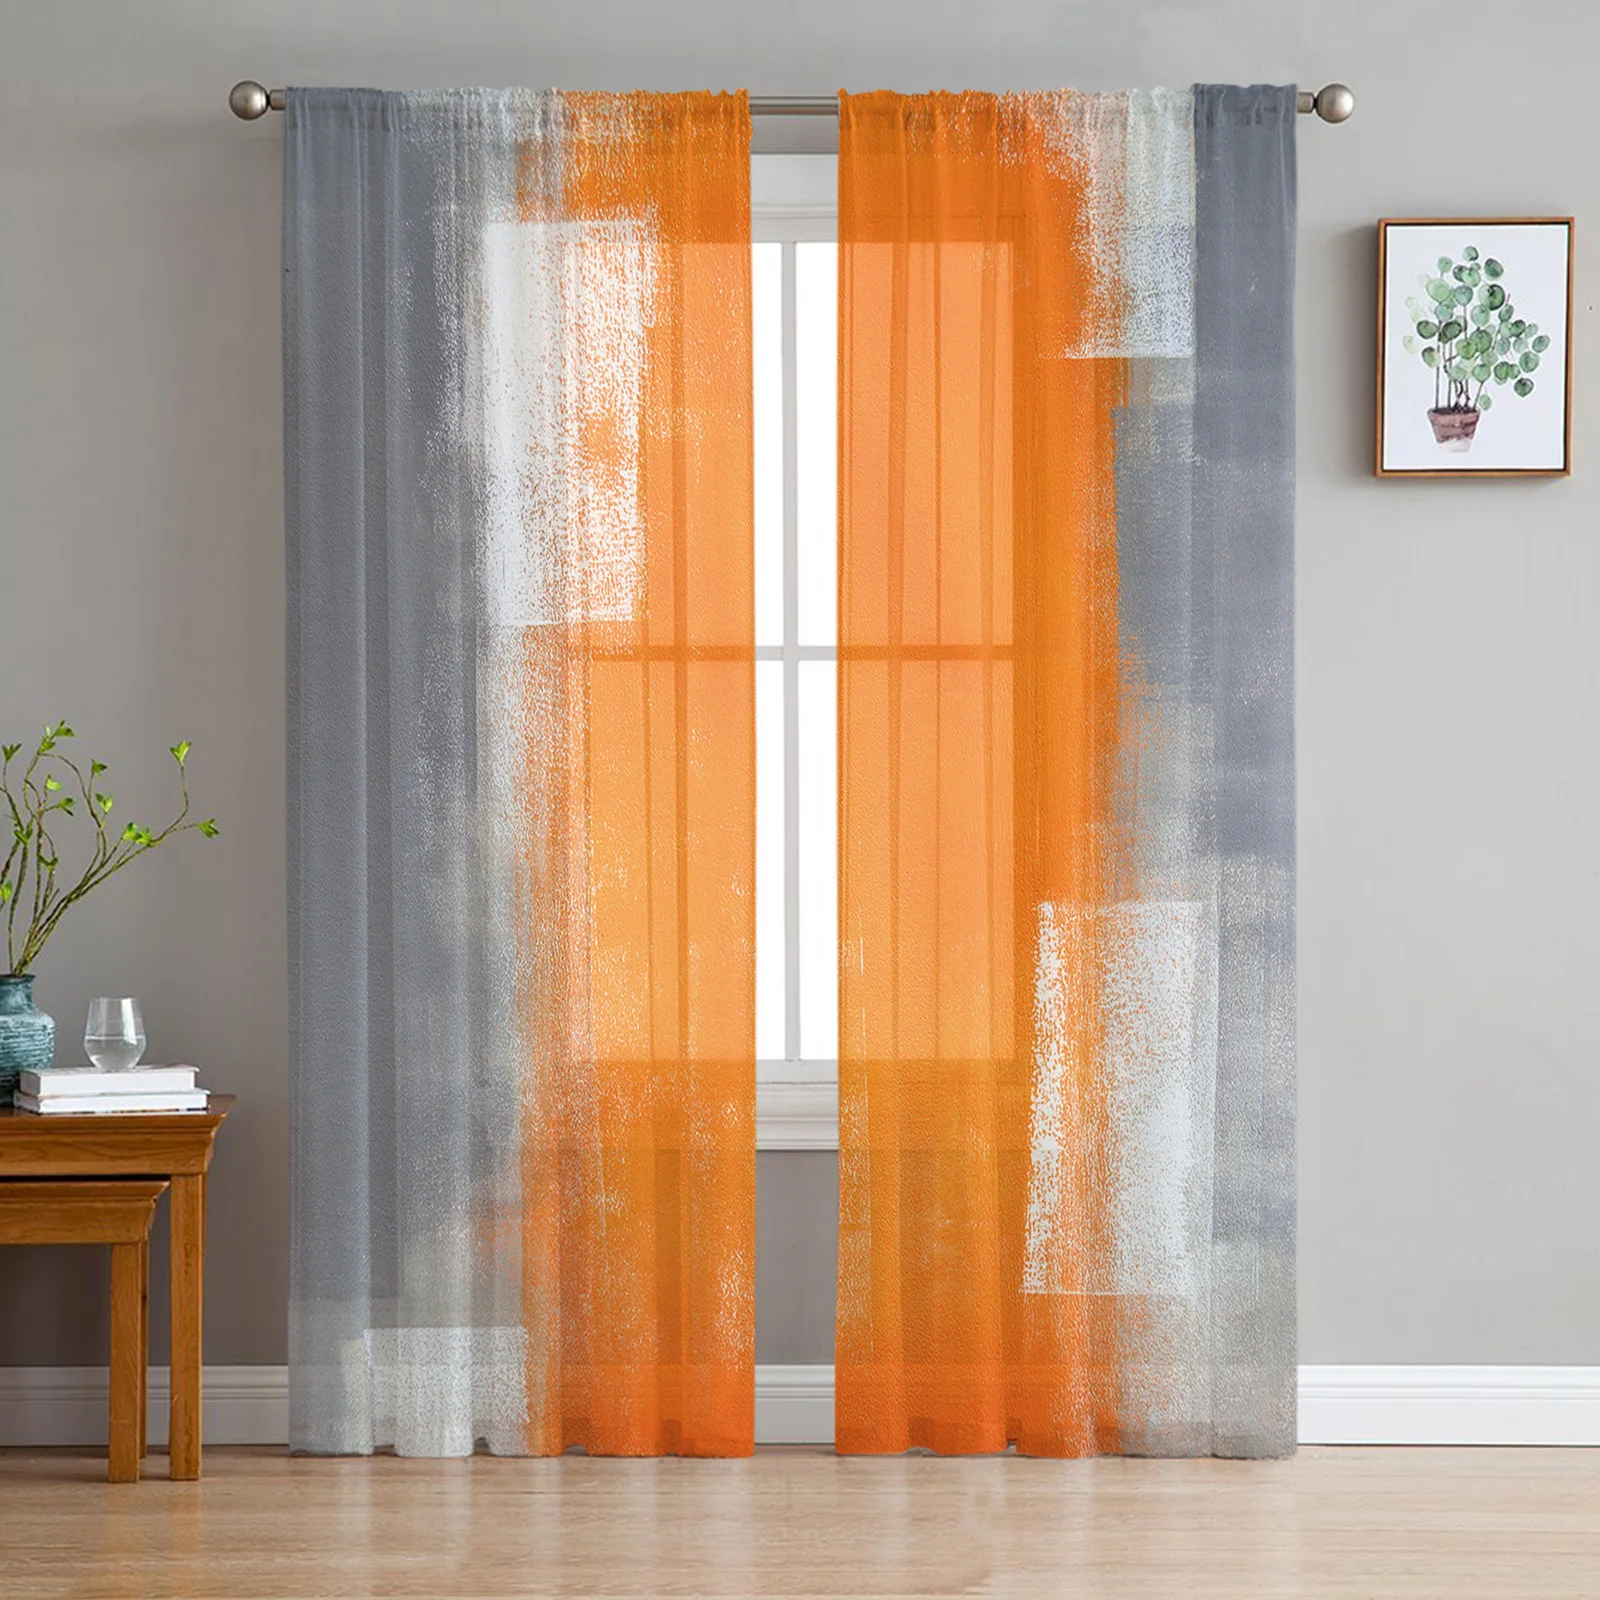 Tulle Sheer Curtains | Window Tulle